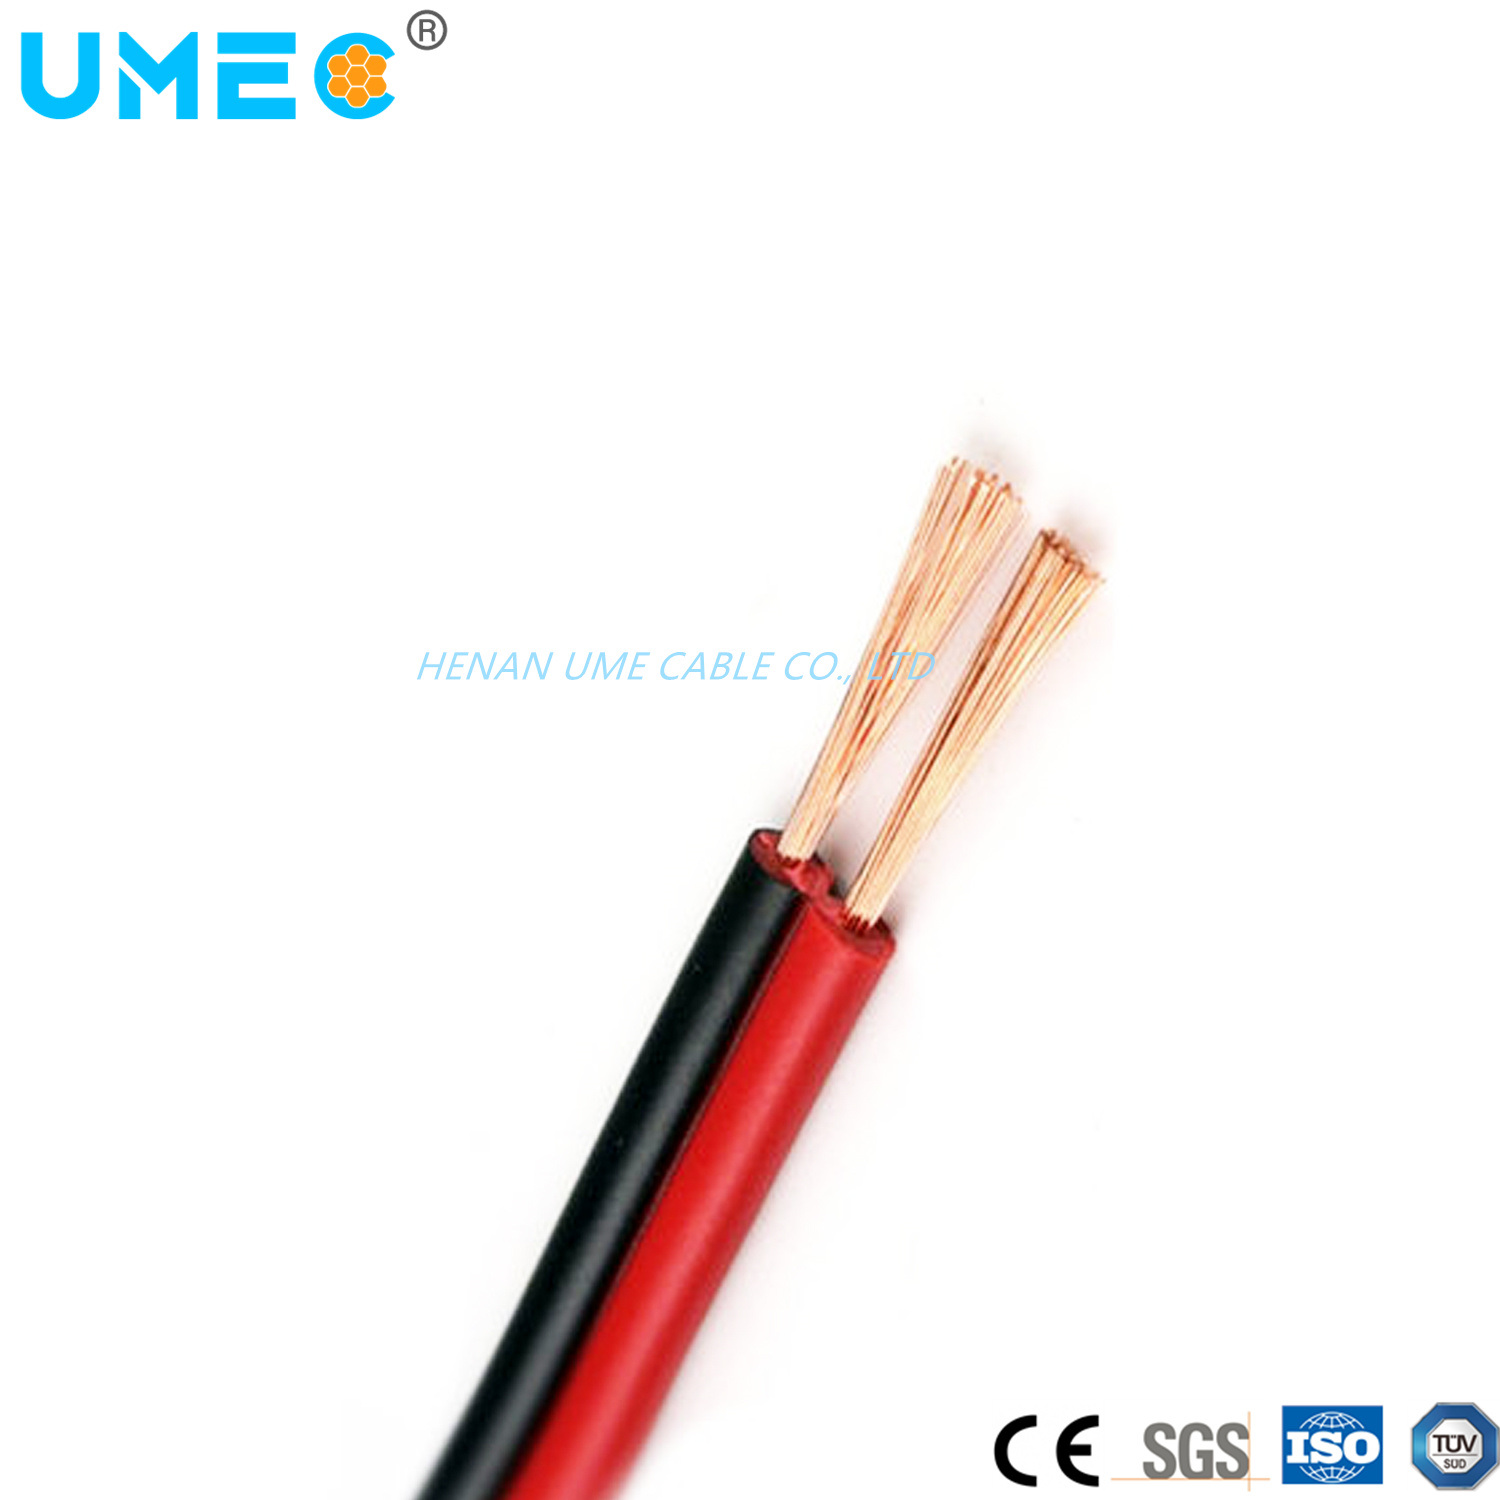 2corex10AWG 12AWG 14AWG Flexible Flat Parallel Twin Spt Electric Cable Wire for Lamp Cord